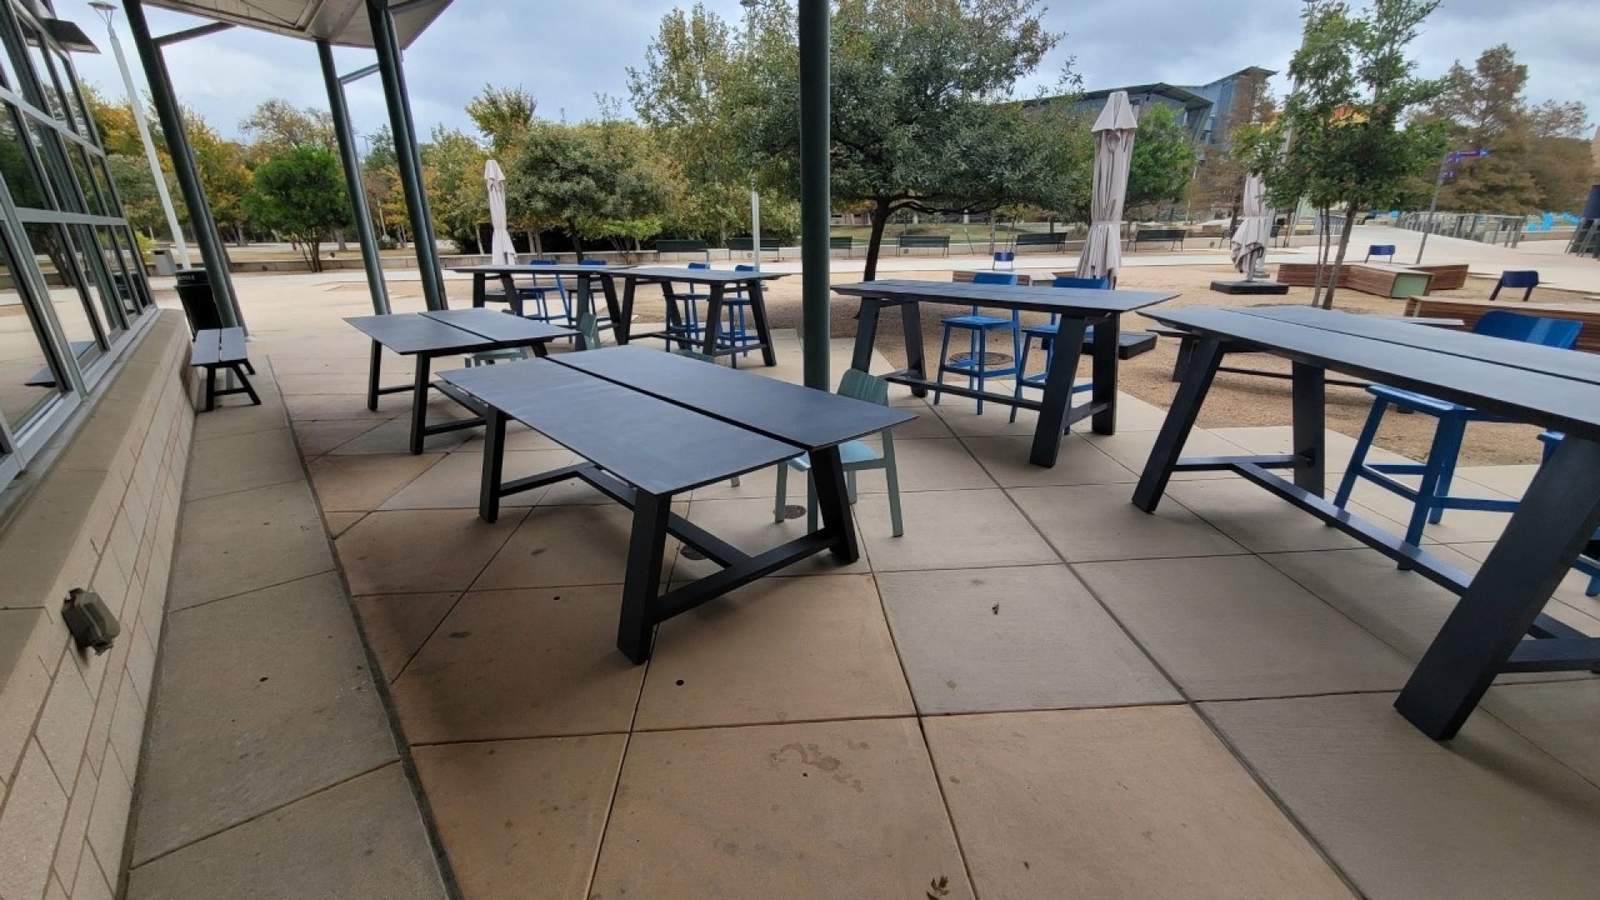 Northwest Vista College using pop up outdoor classrooms to help keep students safe